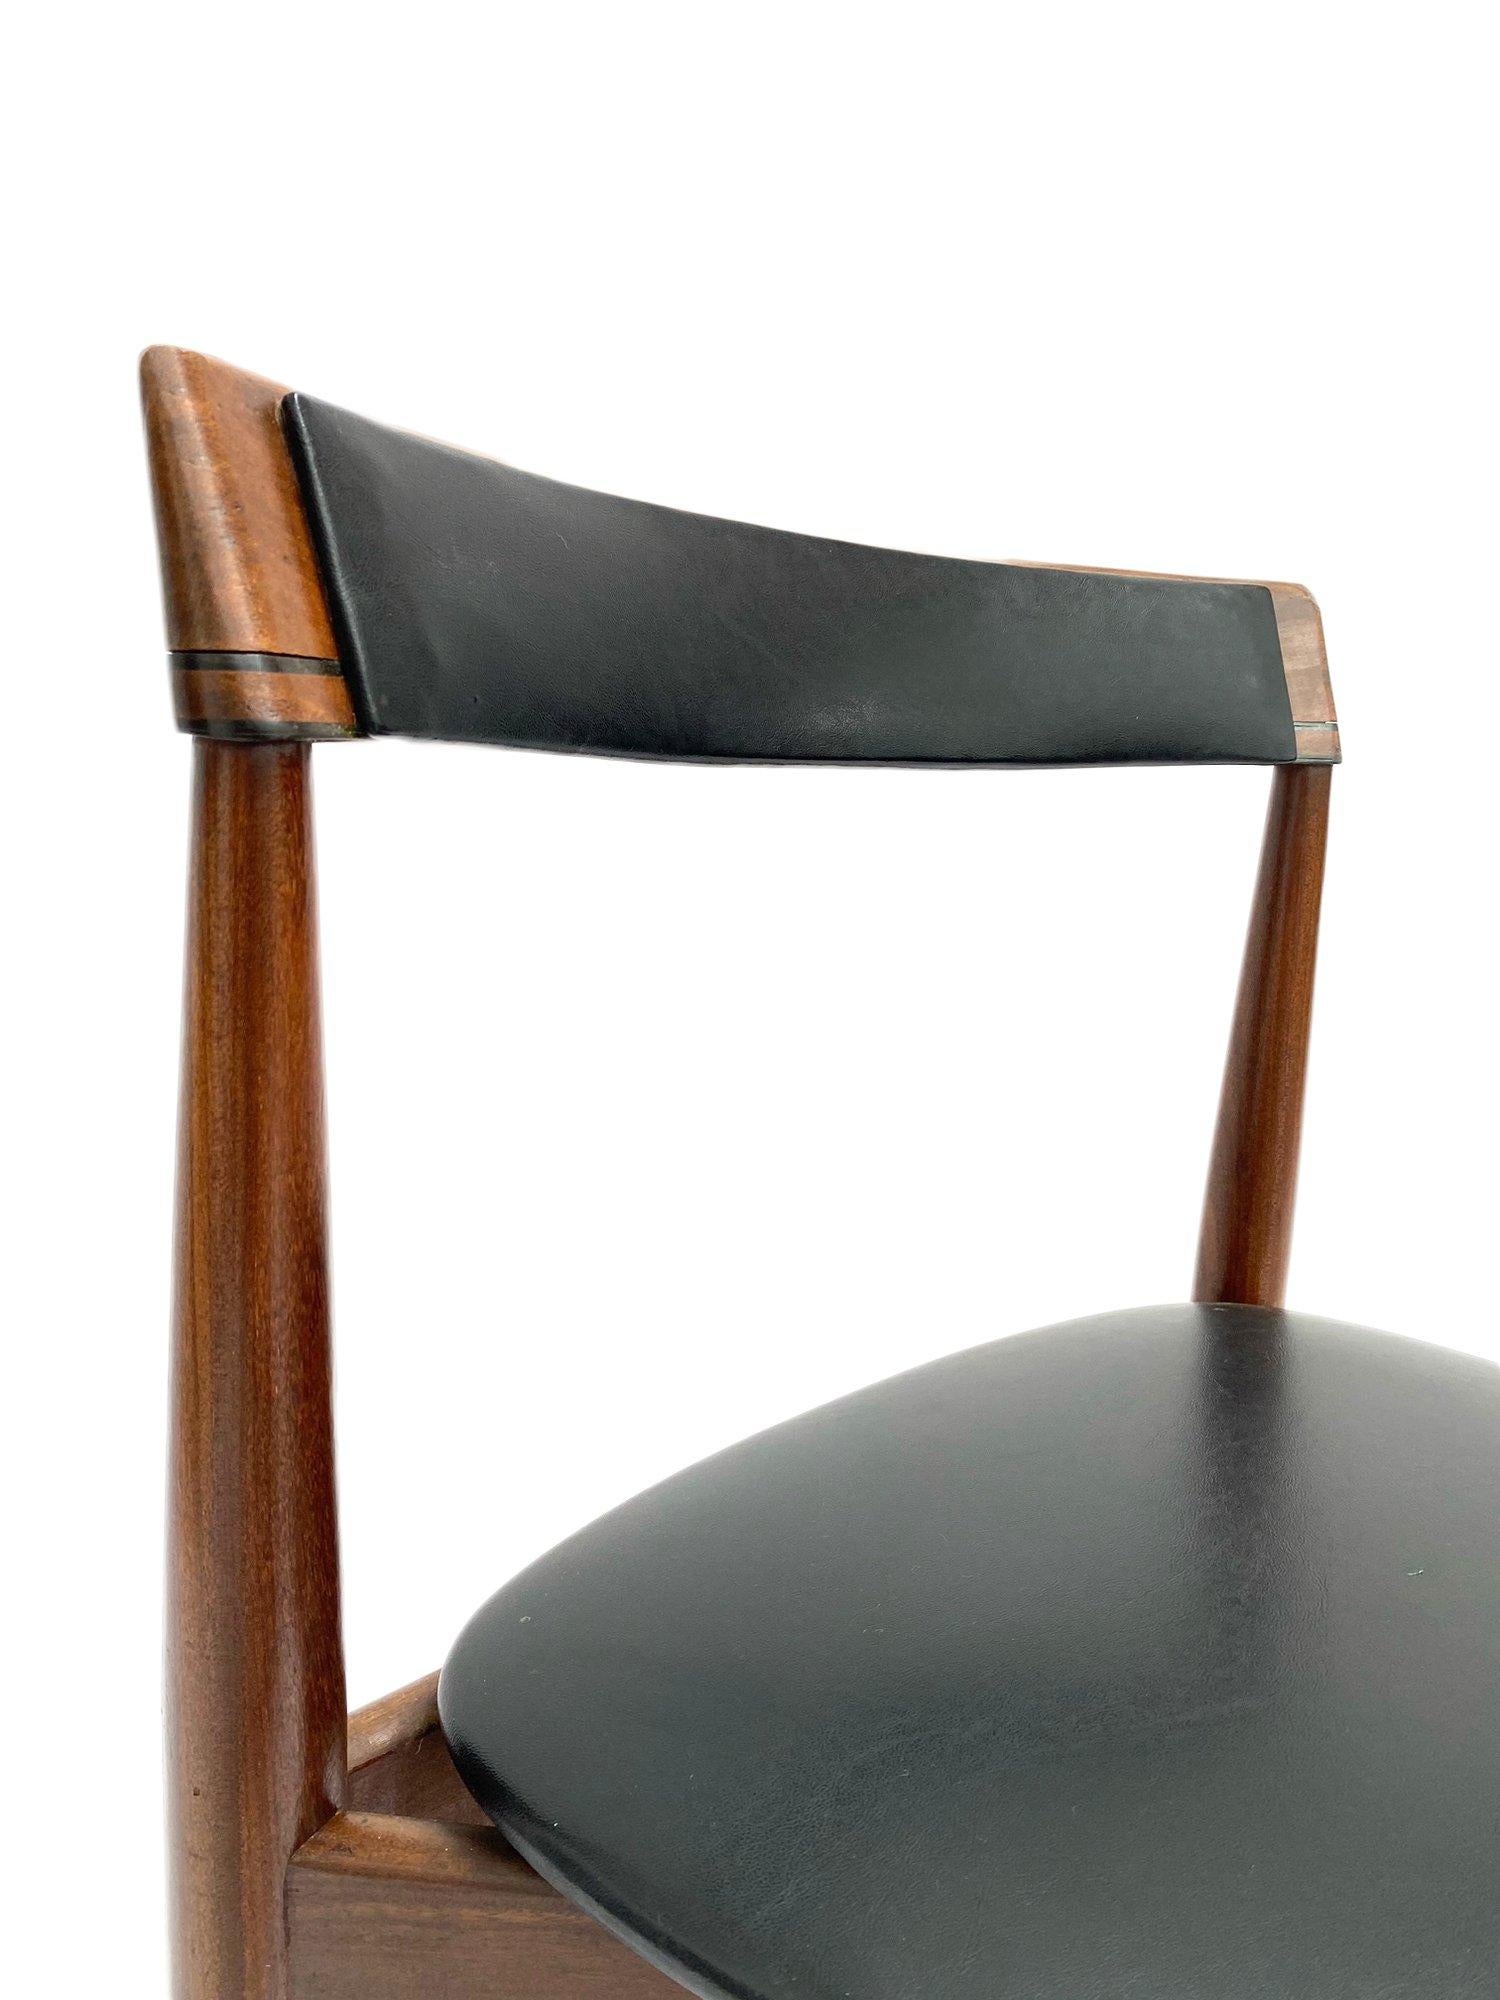 Leather Danish Hans Olsen for Frem Røjle 'Roundette' Series Teak Dining Table and Chairs